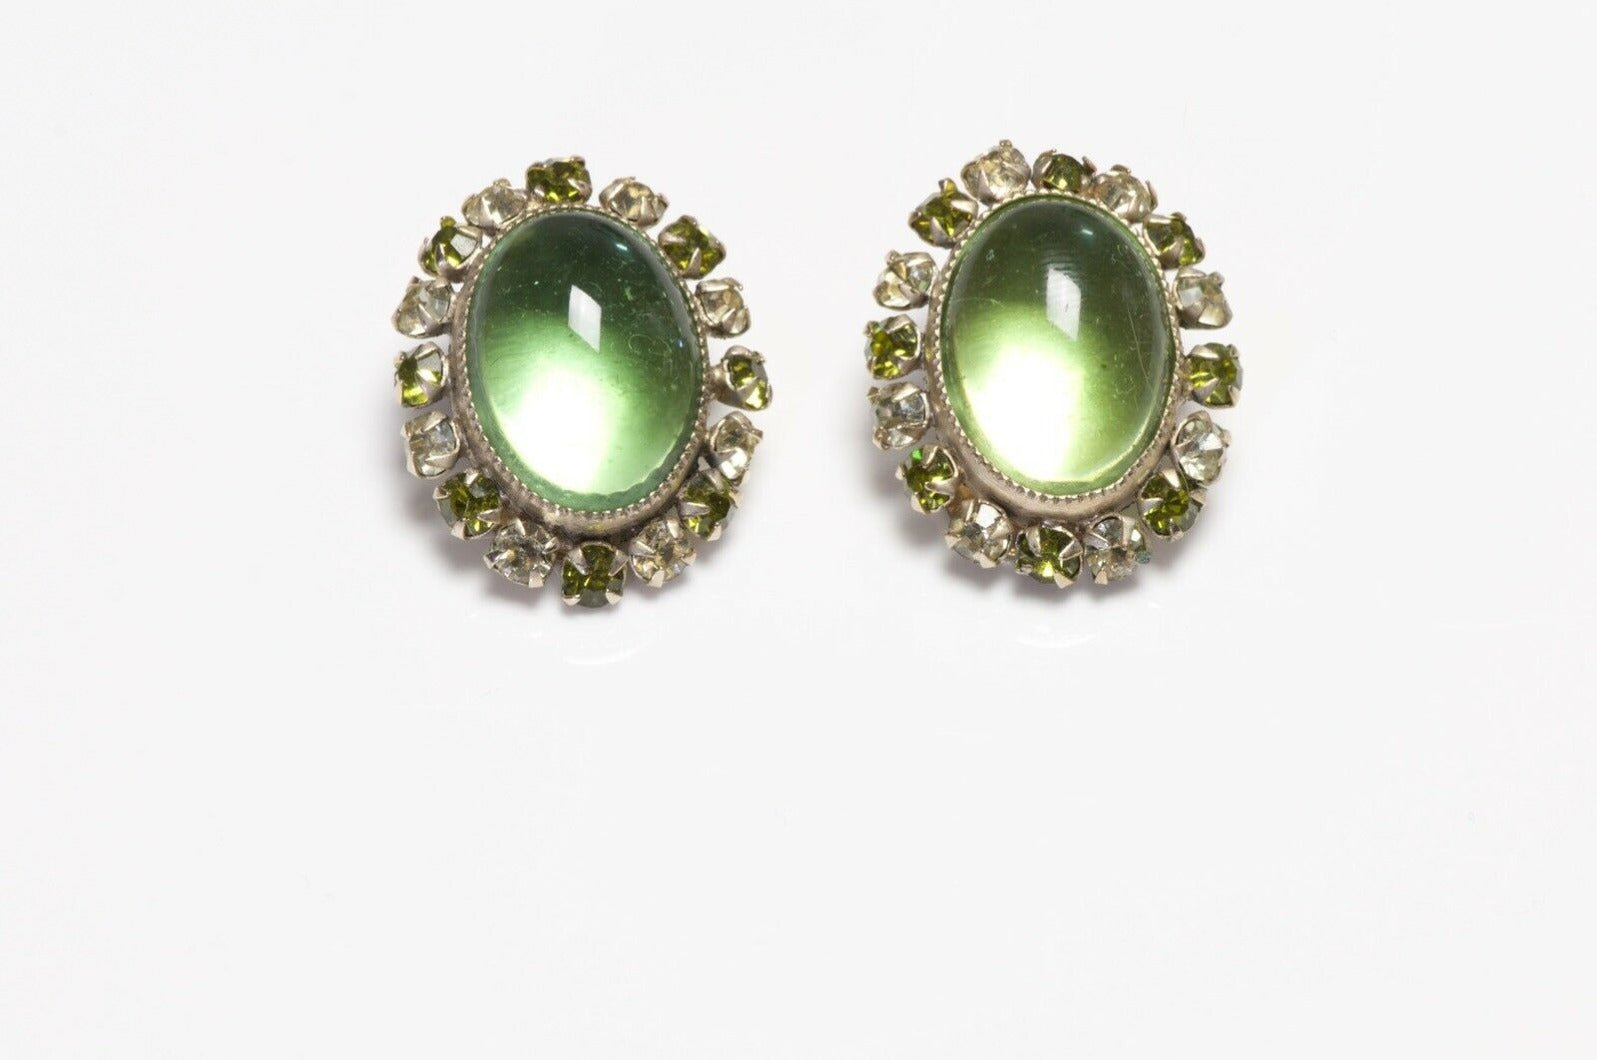 SCHREINER NY Green Cabochon Glass Crystal Brooch Earrings Set